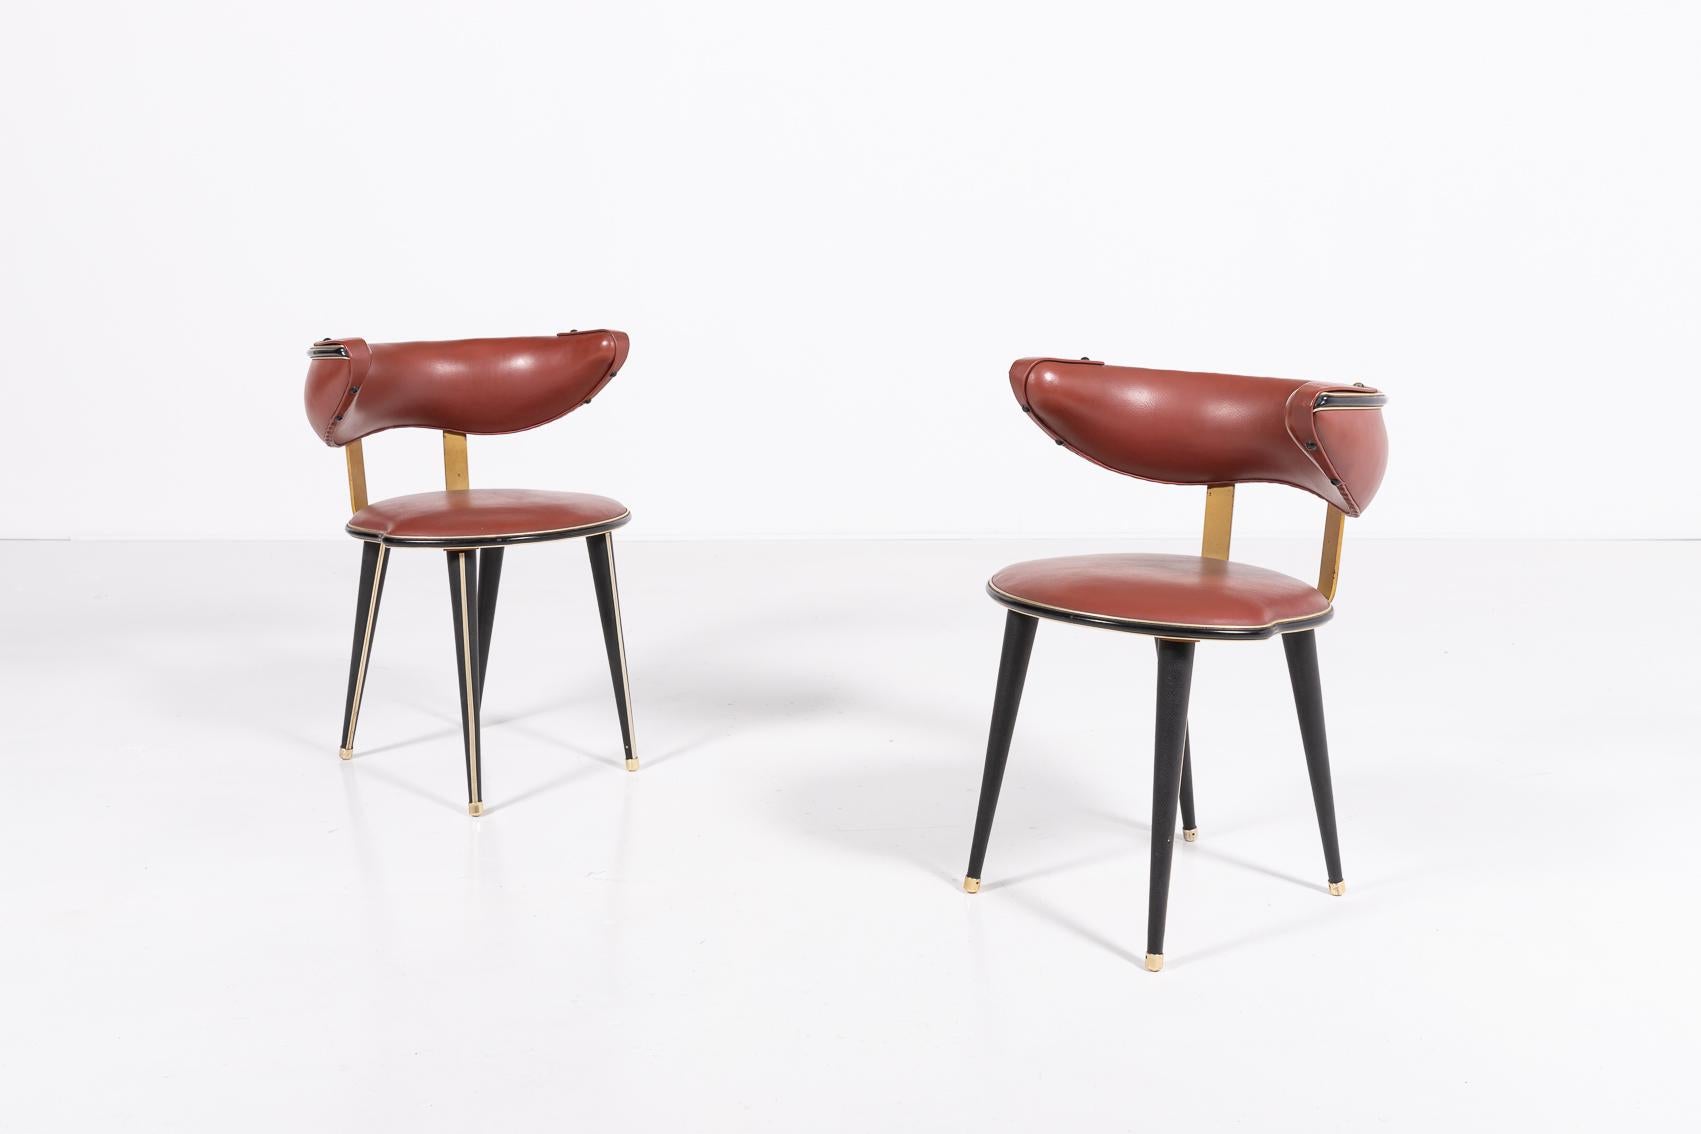 Beautiful curved backrest pair of chairs from Anonima Castelli, 1960’s. Wooden frame with burgundy Eco Leather seat and backrest upholstery.

Condition
Good, age related wear and marks

Dimensions
depth: 75 cm
width: 80 cm
height: 74 cm
seat height: